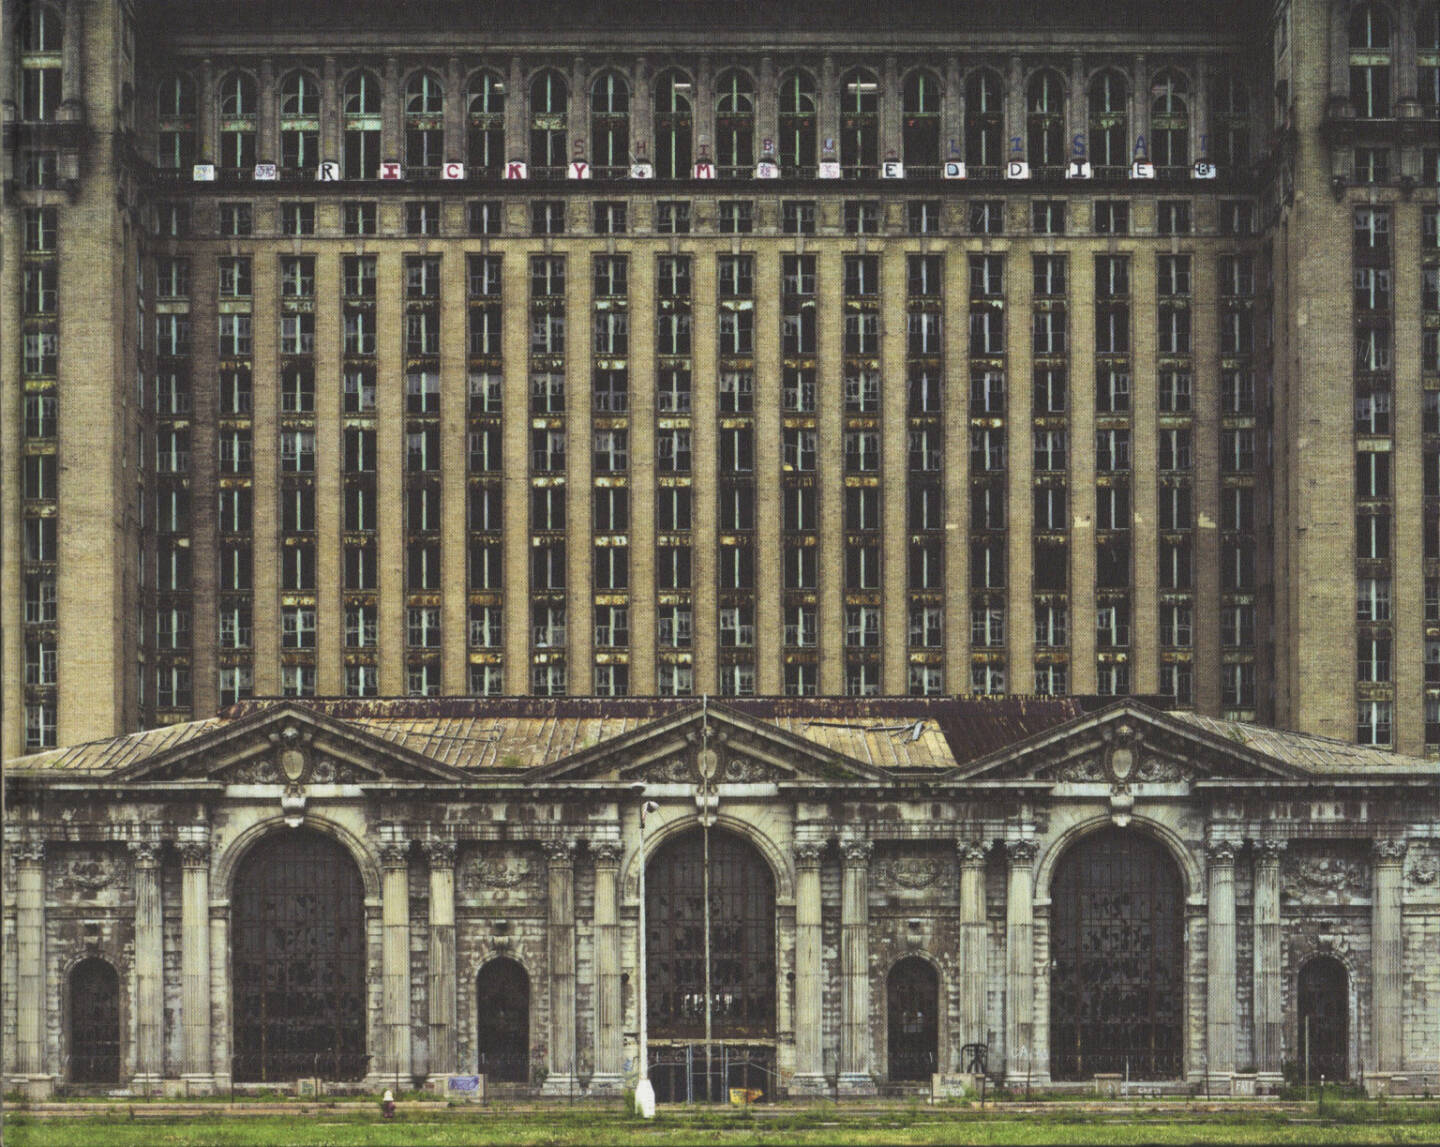 Yves Marchand and Romain Meffre - The Ruins of Detroit, 200-300 Euro, http://josefchladek.com/book/yves_marchand_and_romain_meffre_-_the_ruins_of_detroit